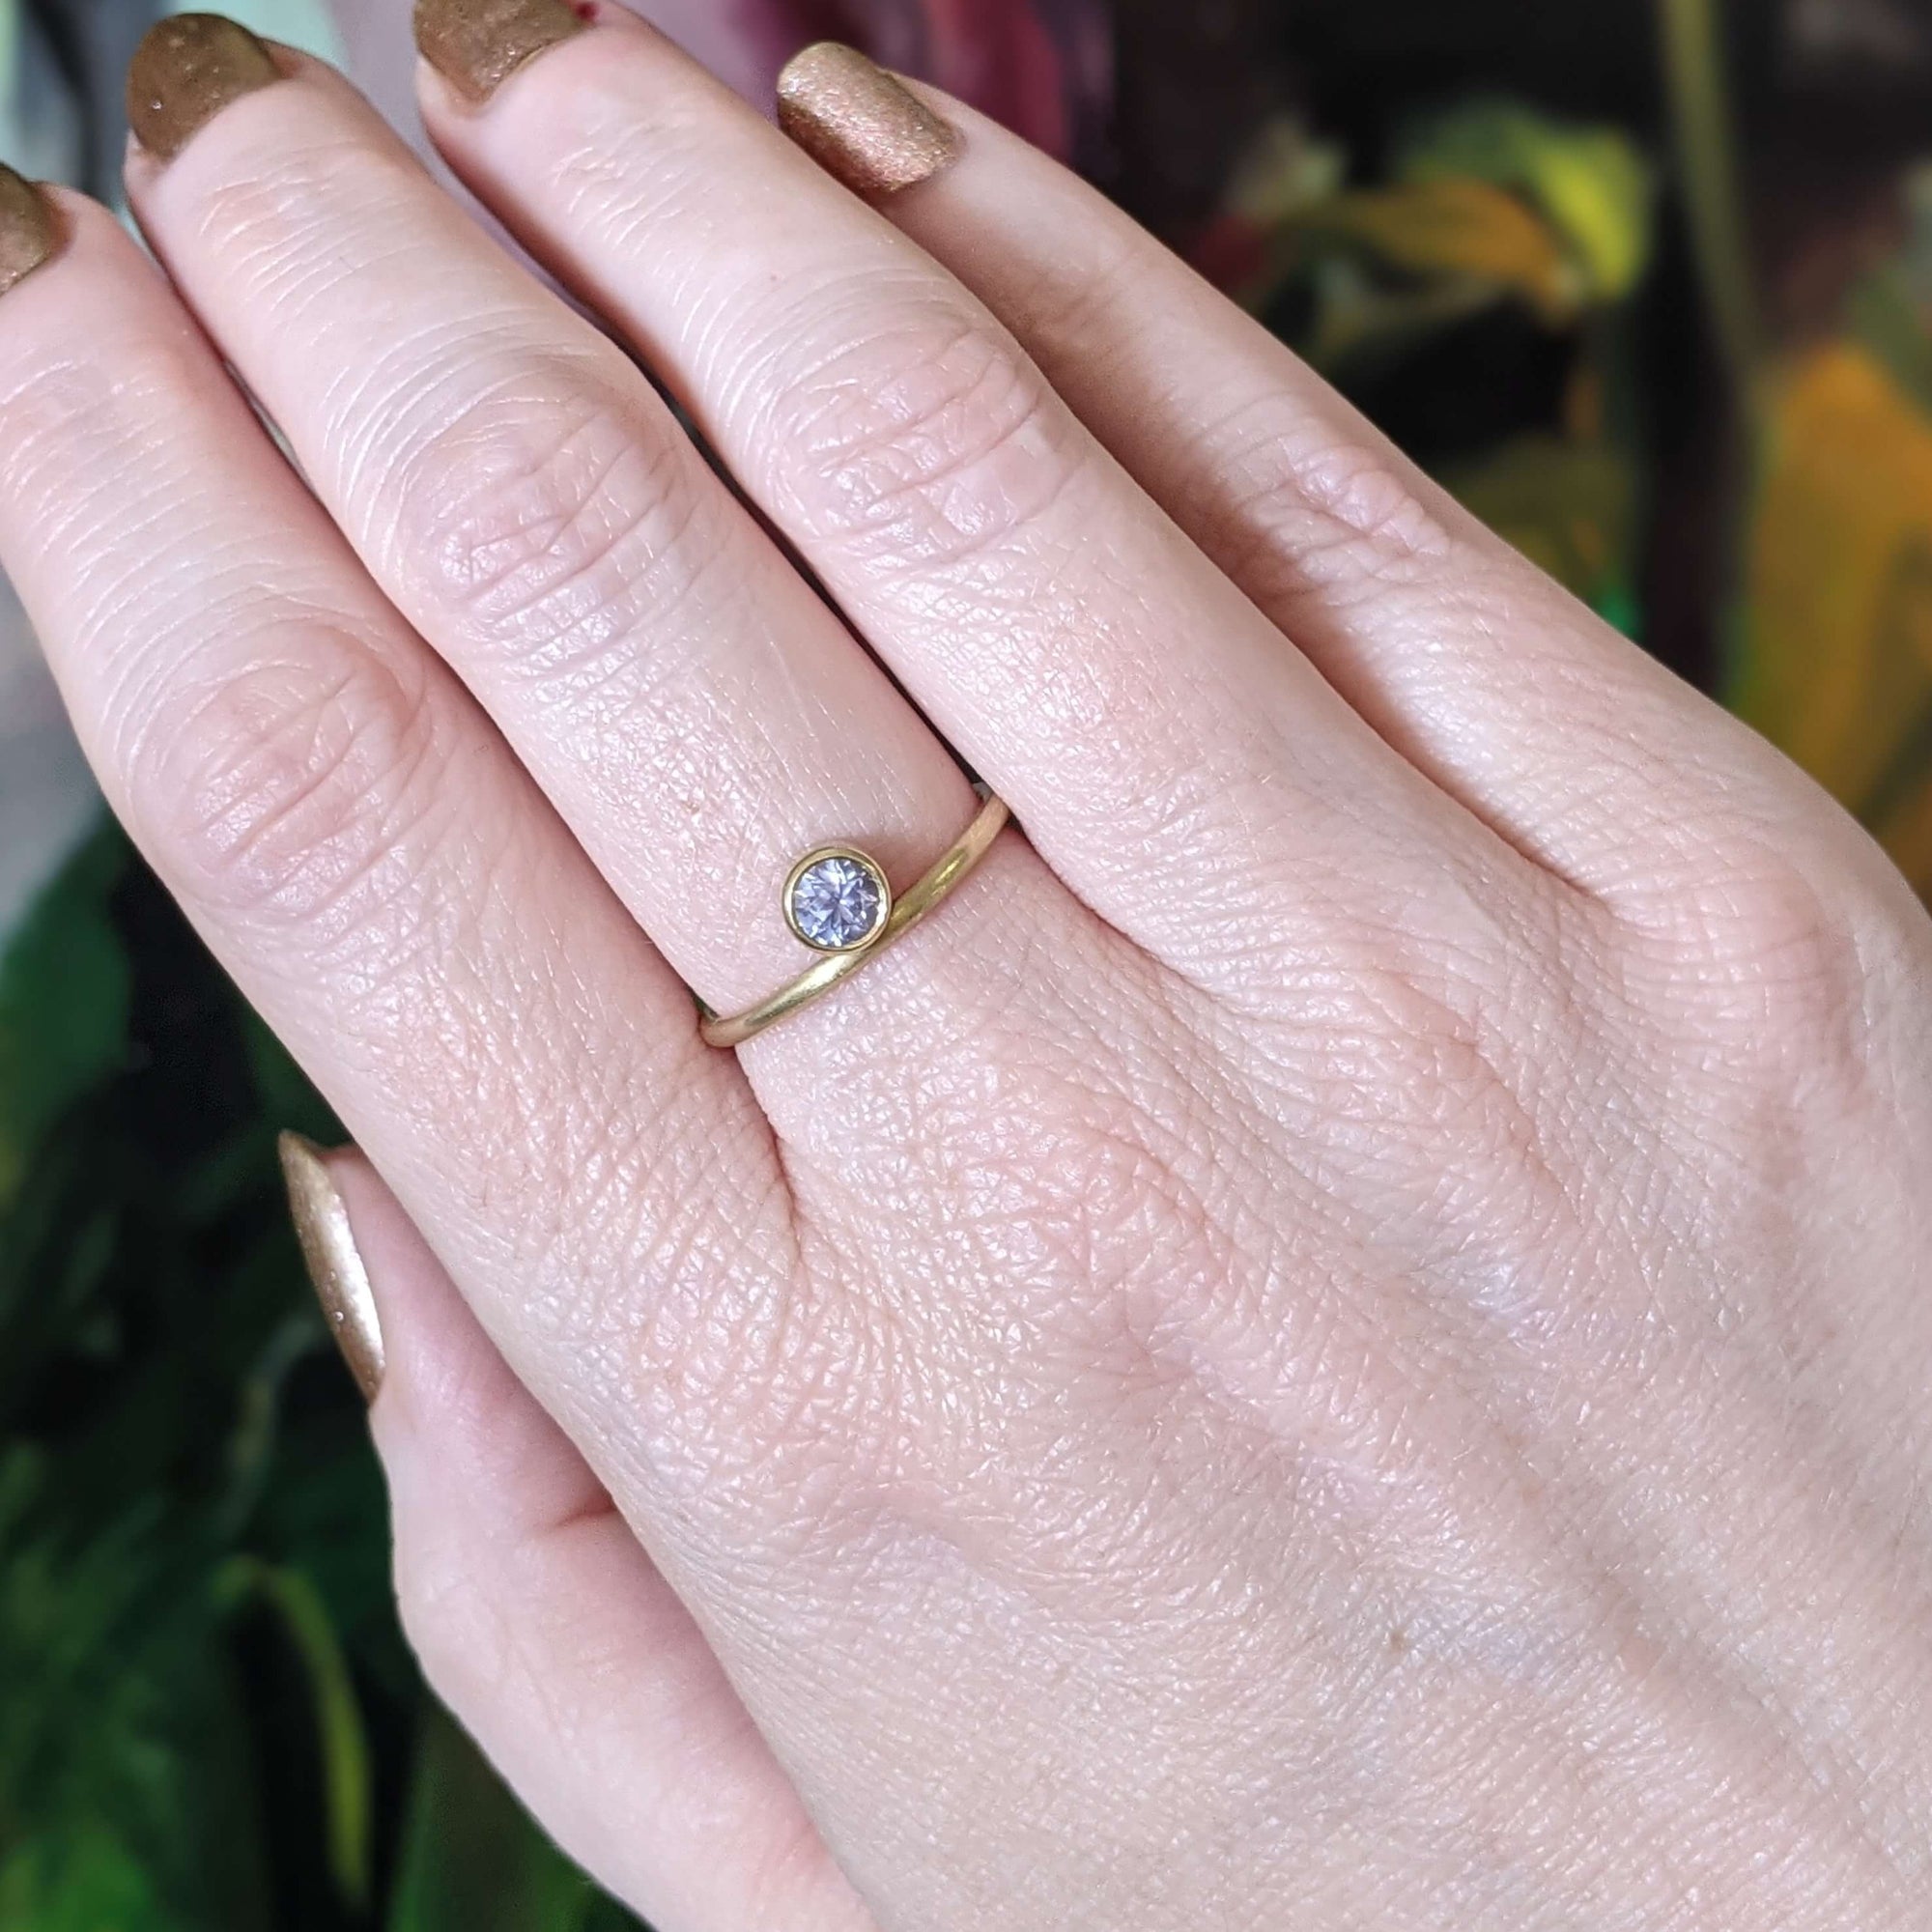 Light purple sapphire solitaire in yellow gold. Handmade with recycled metal and conflict-free stone by EC Design Jewelry in Minneapolis, MN.